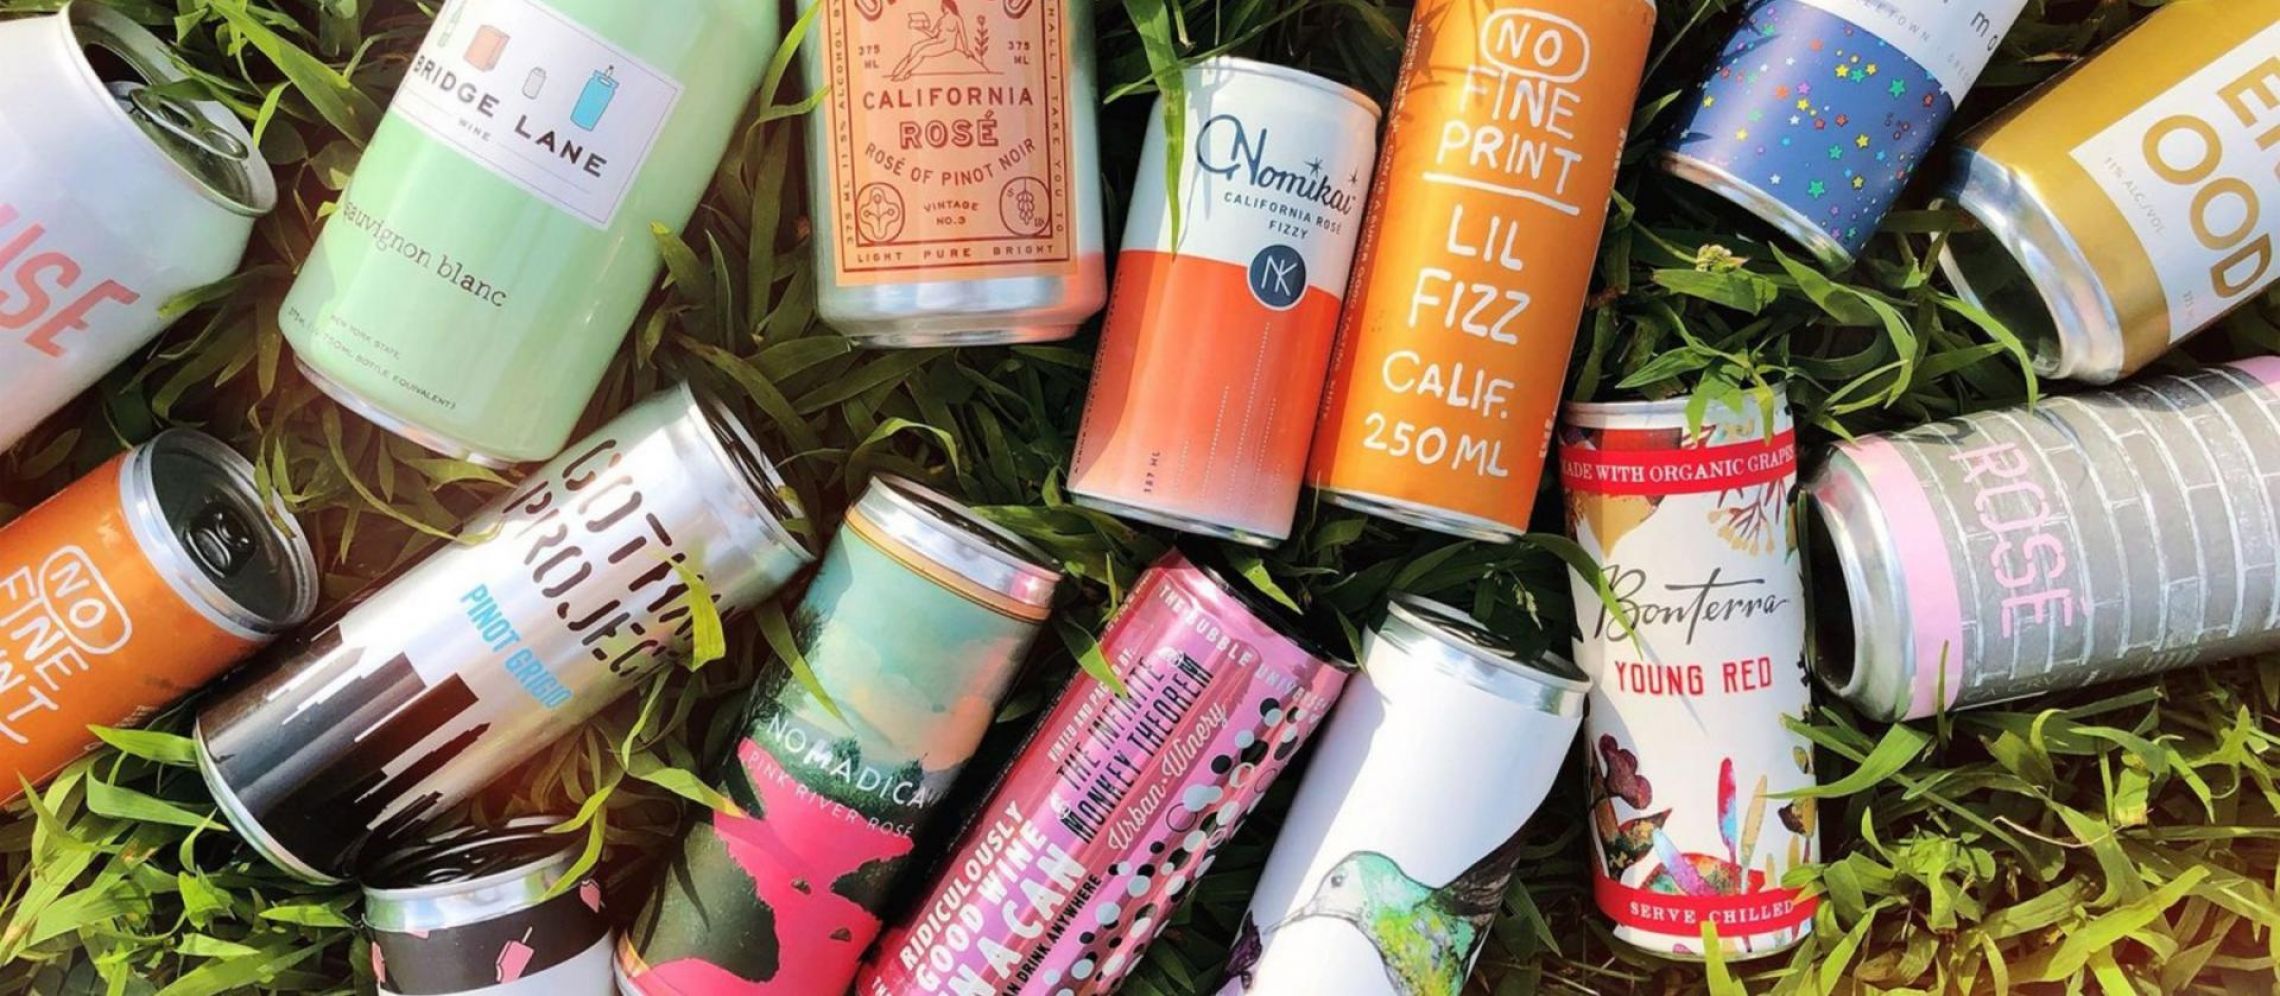 Photo for: UK’s Top Eco Canned Wines That You Should Try